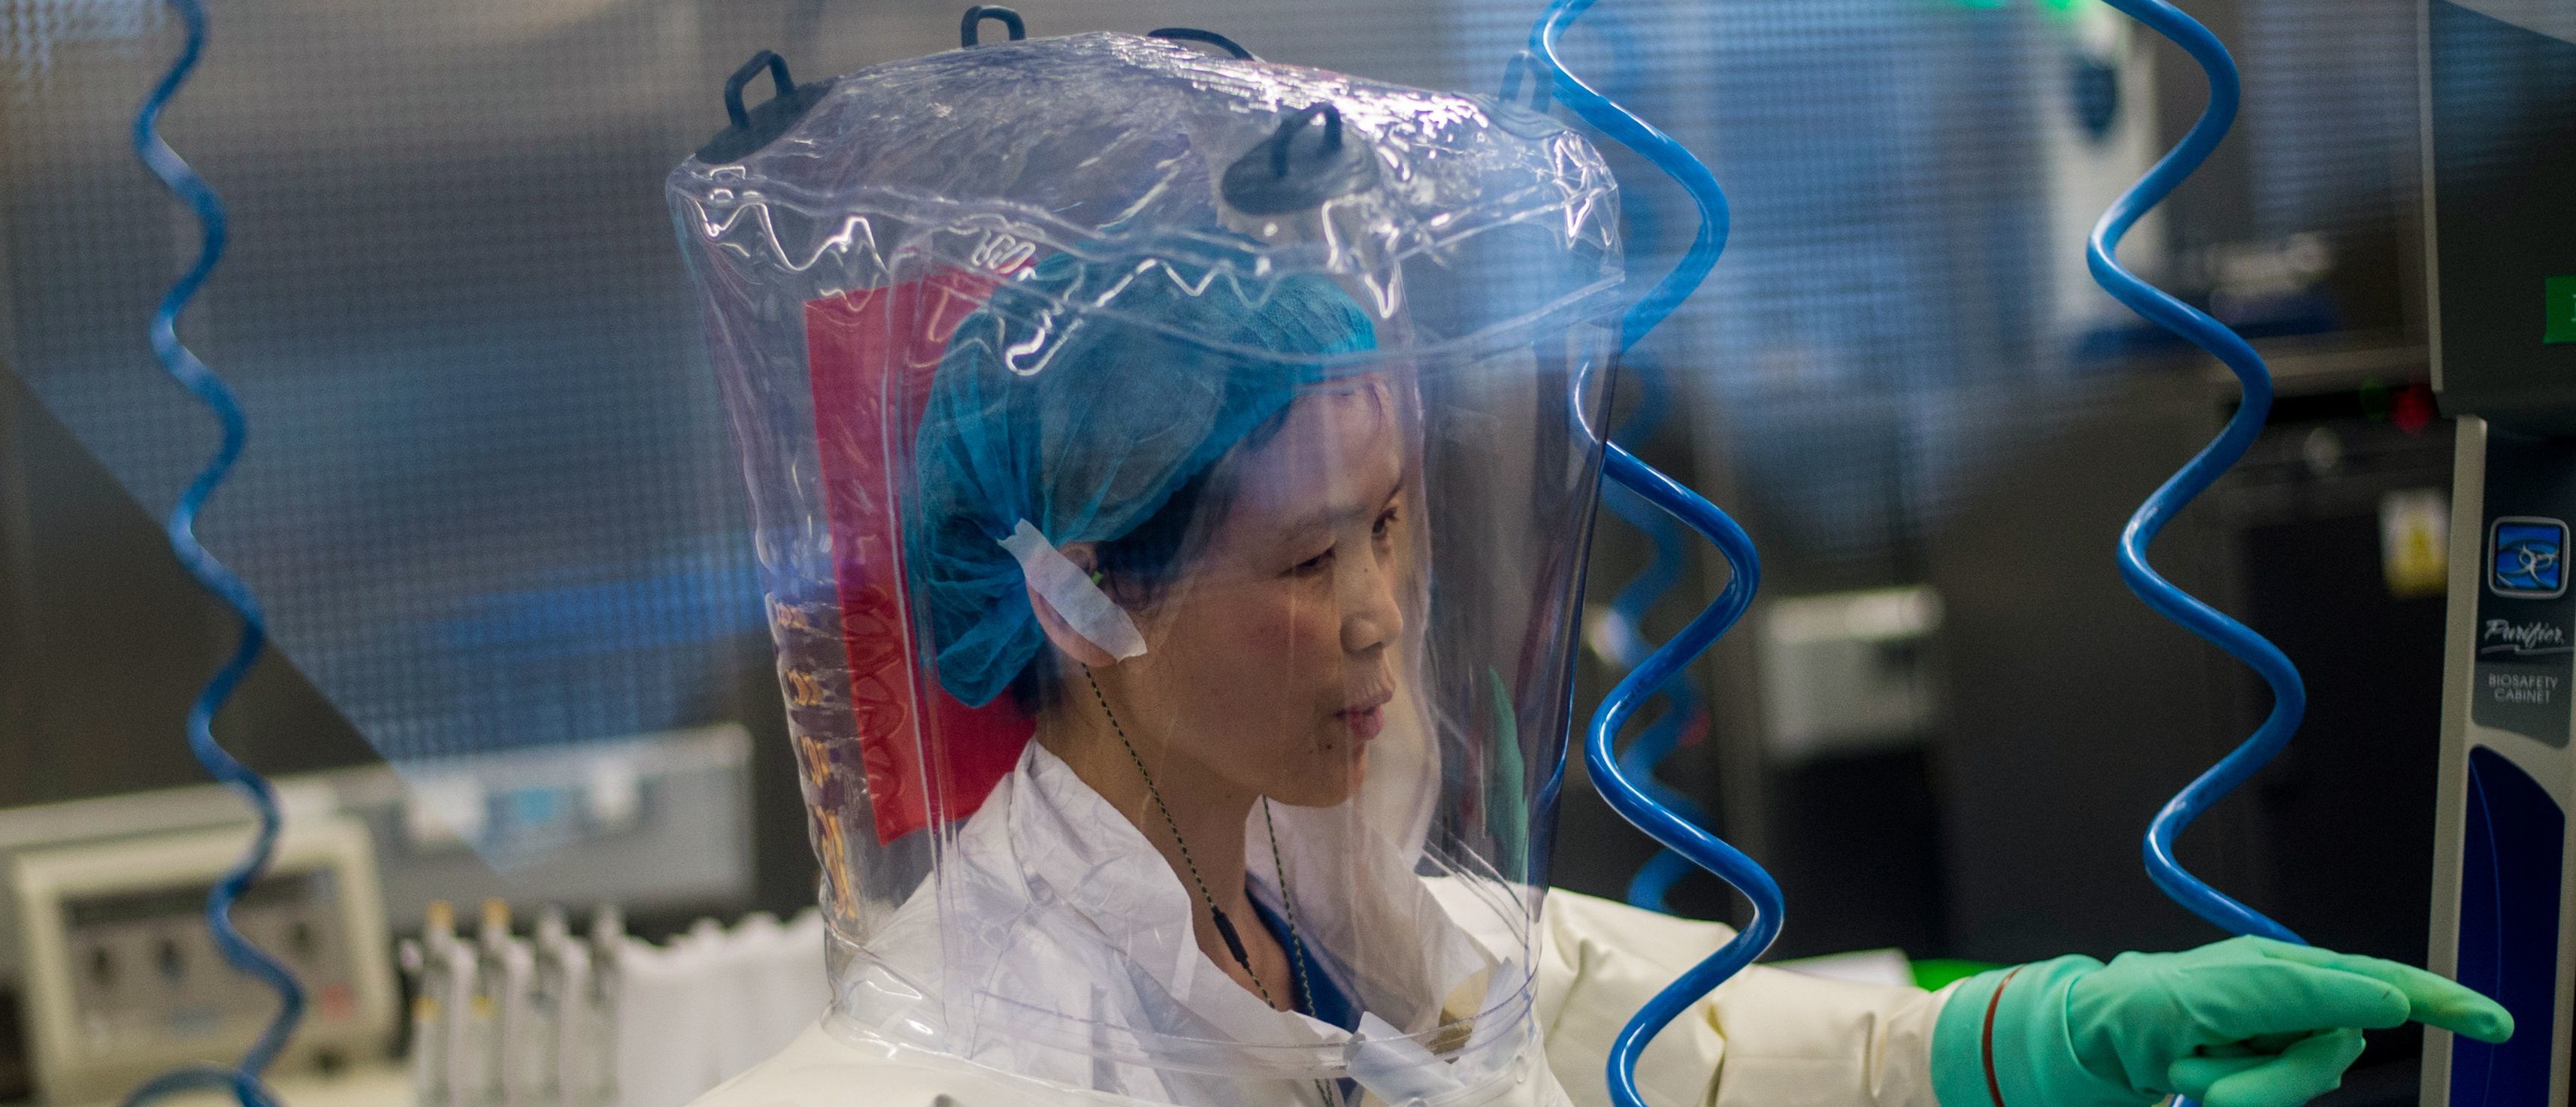 Chinese virologist Shi Zhengli is seen inside the P4 laboratory in Wuhan, capital of China's Hubei province, on February 23, 2017. - The P4 epidemiological laboratory was built in co-operation with French bio-industrial firm Institut Merieux and the Chinese Academy of Sciences. (Photo by Johannes EISELE / AFP) (Photo by JOHANNES EISELE/AFP via Getty Images)